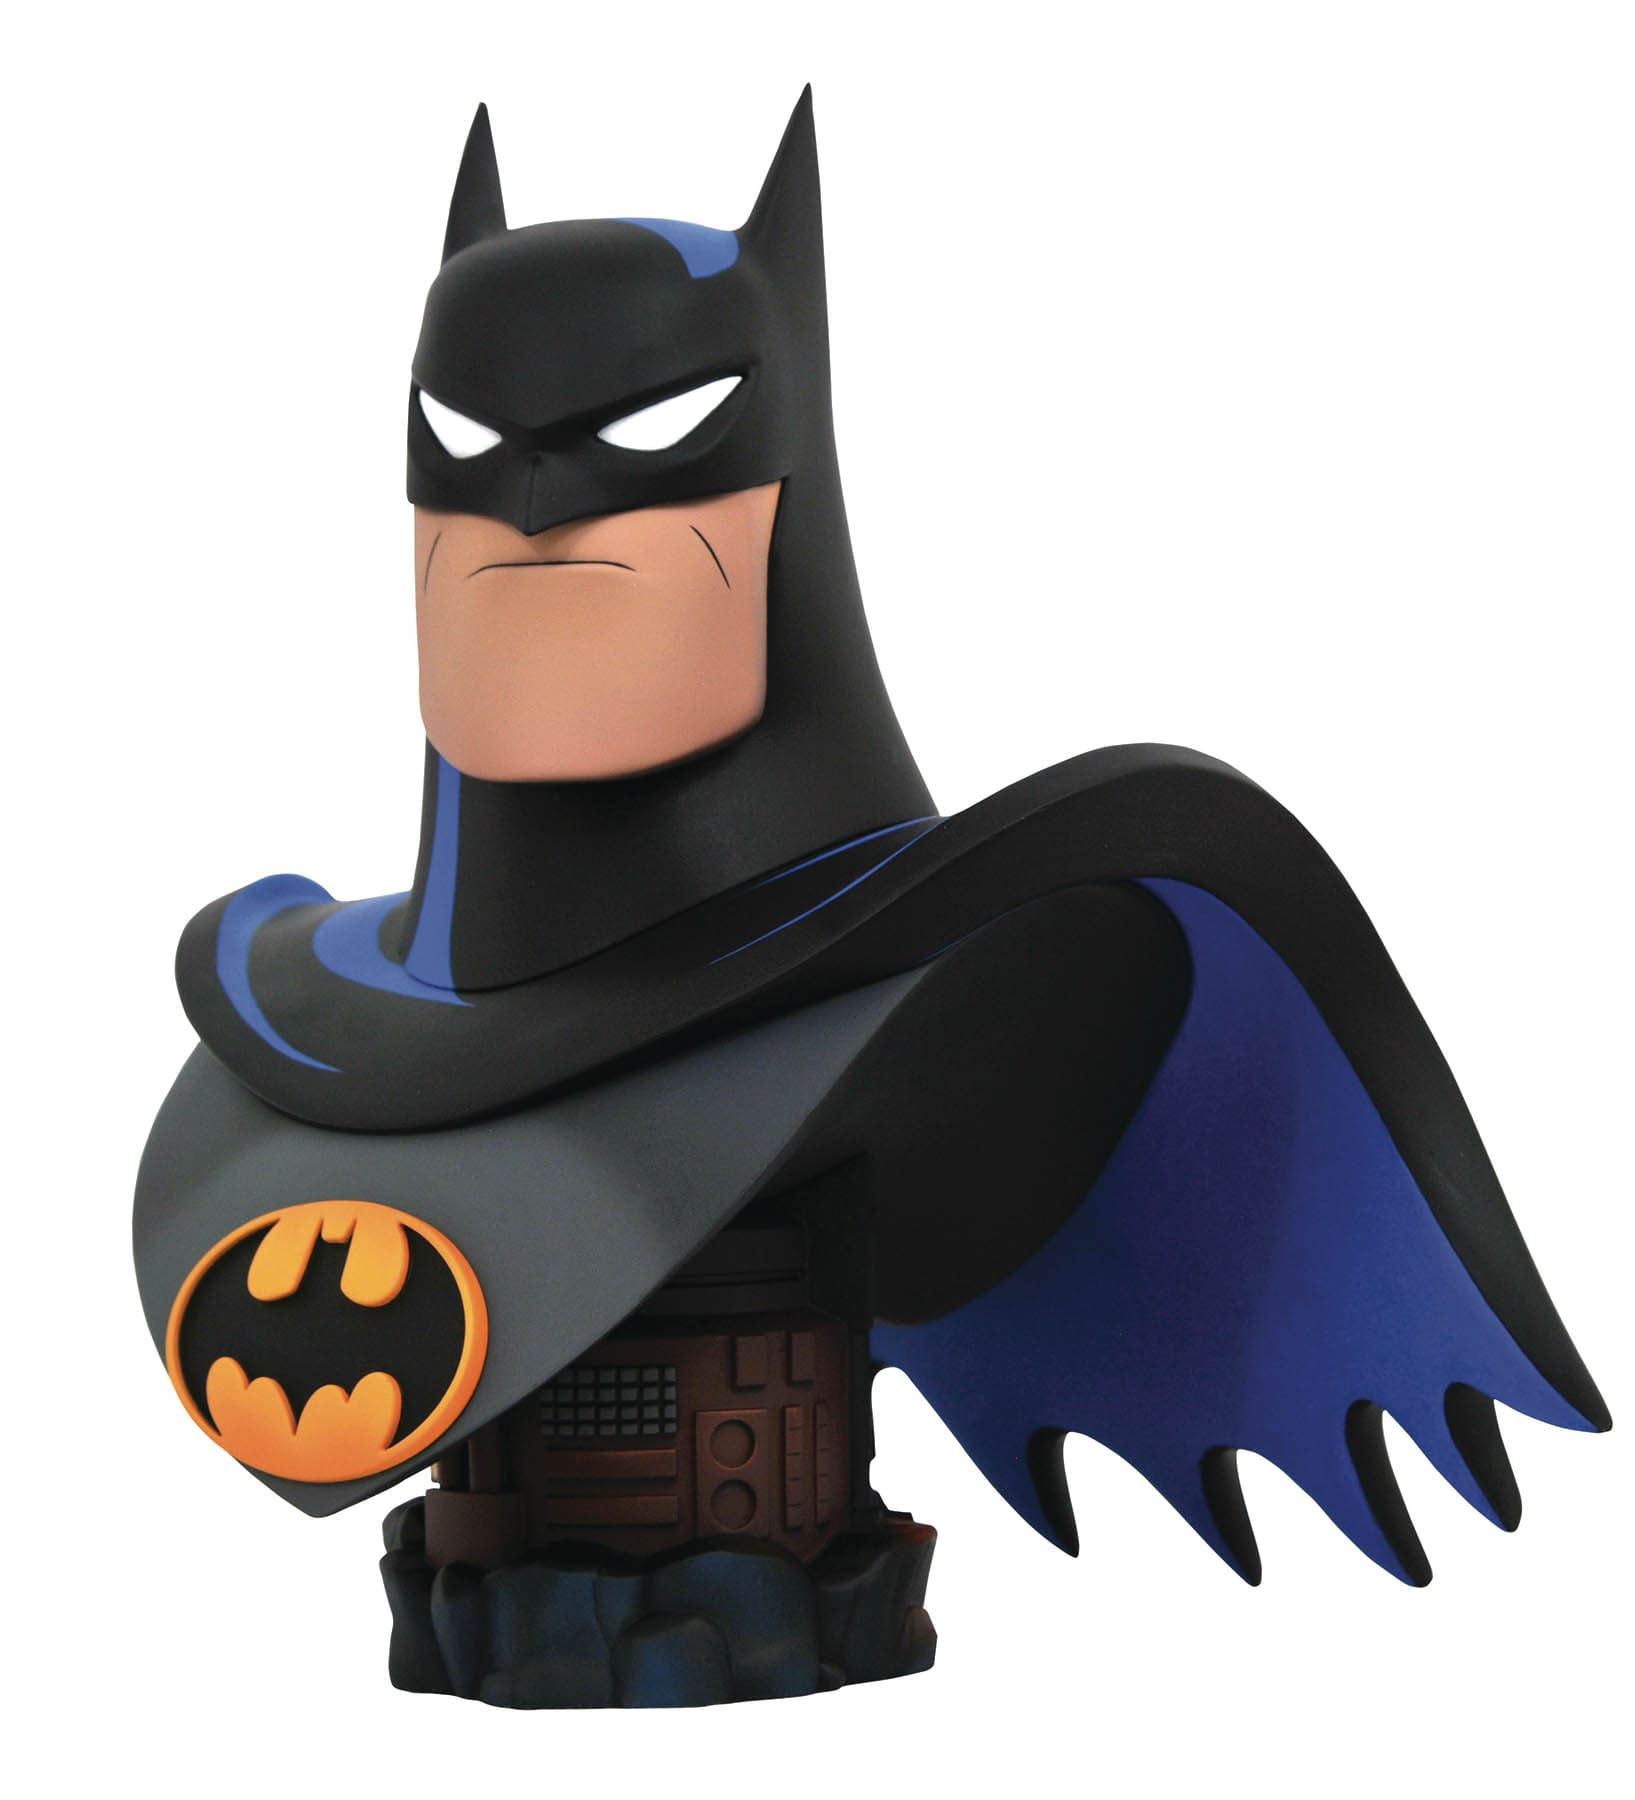 Batman Gets Three New Statues from Diamond Select Toys